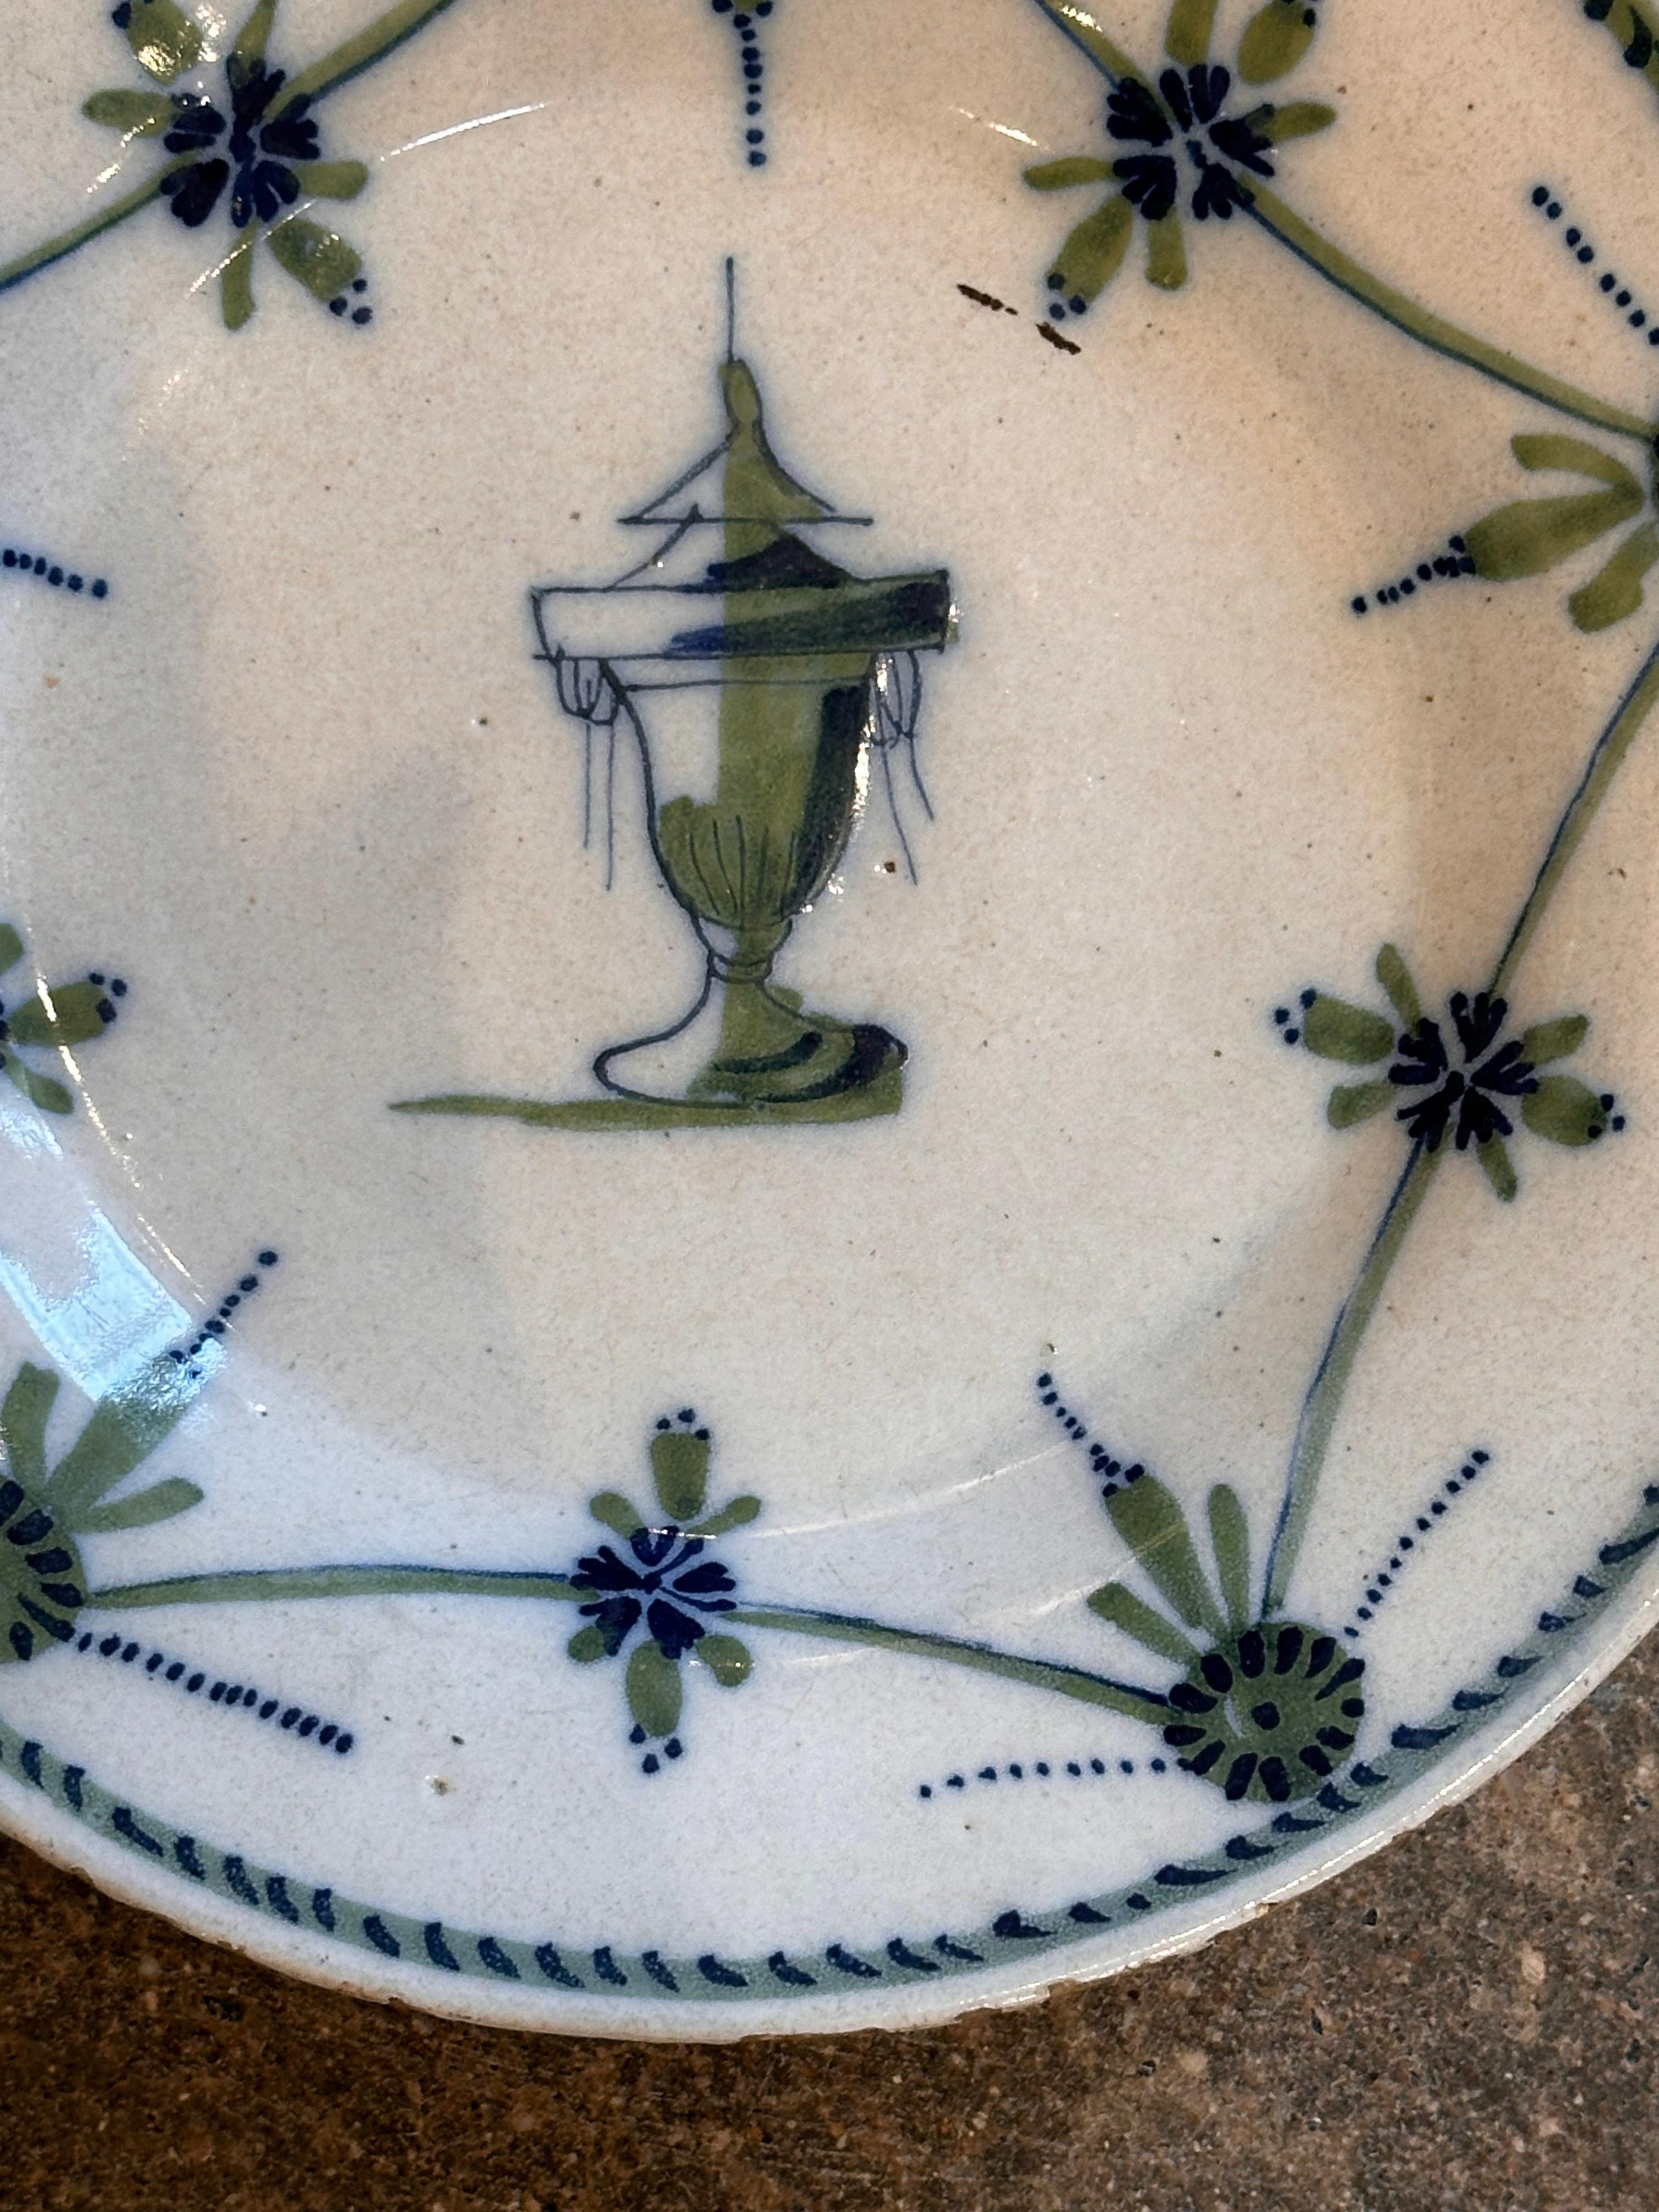 A unique color and design on this polychrome plate. Add to you collection.